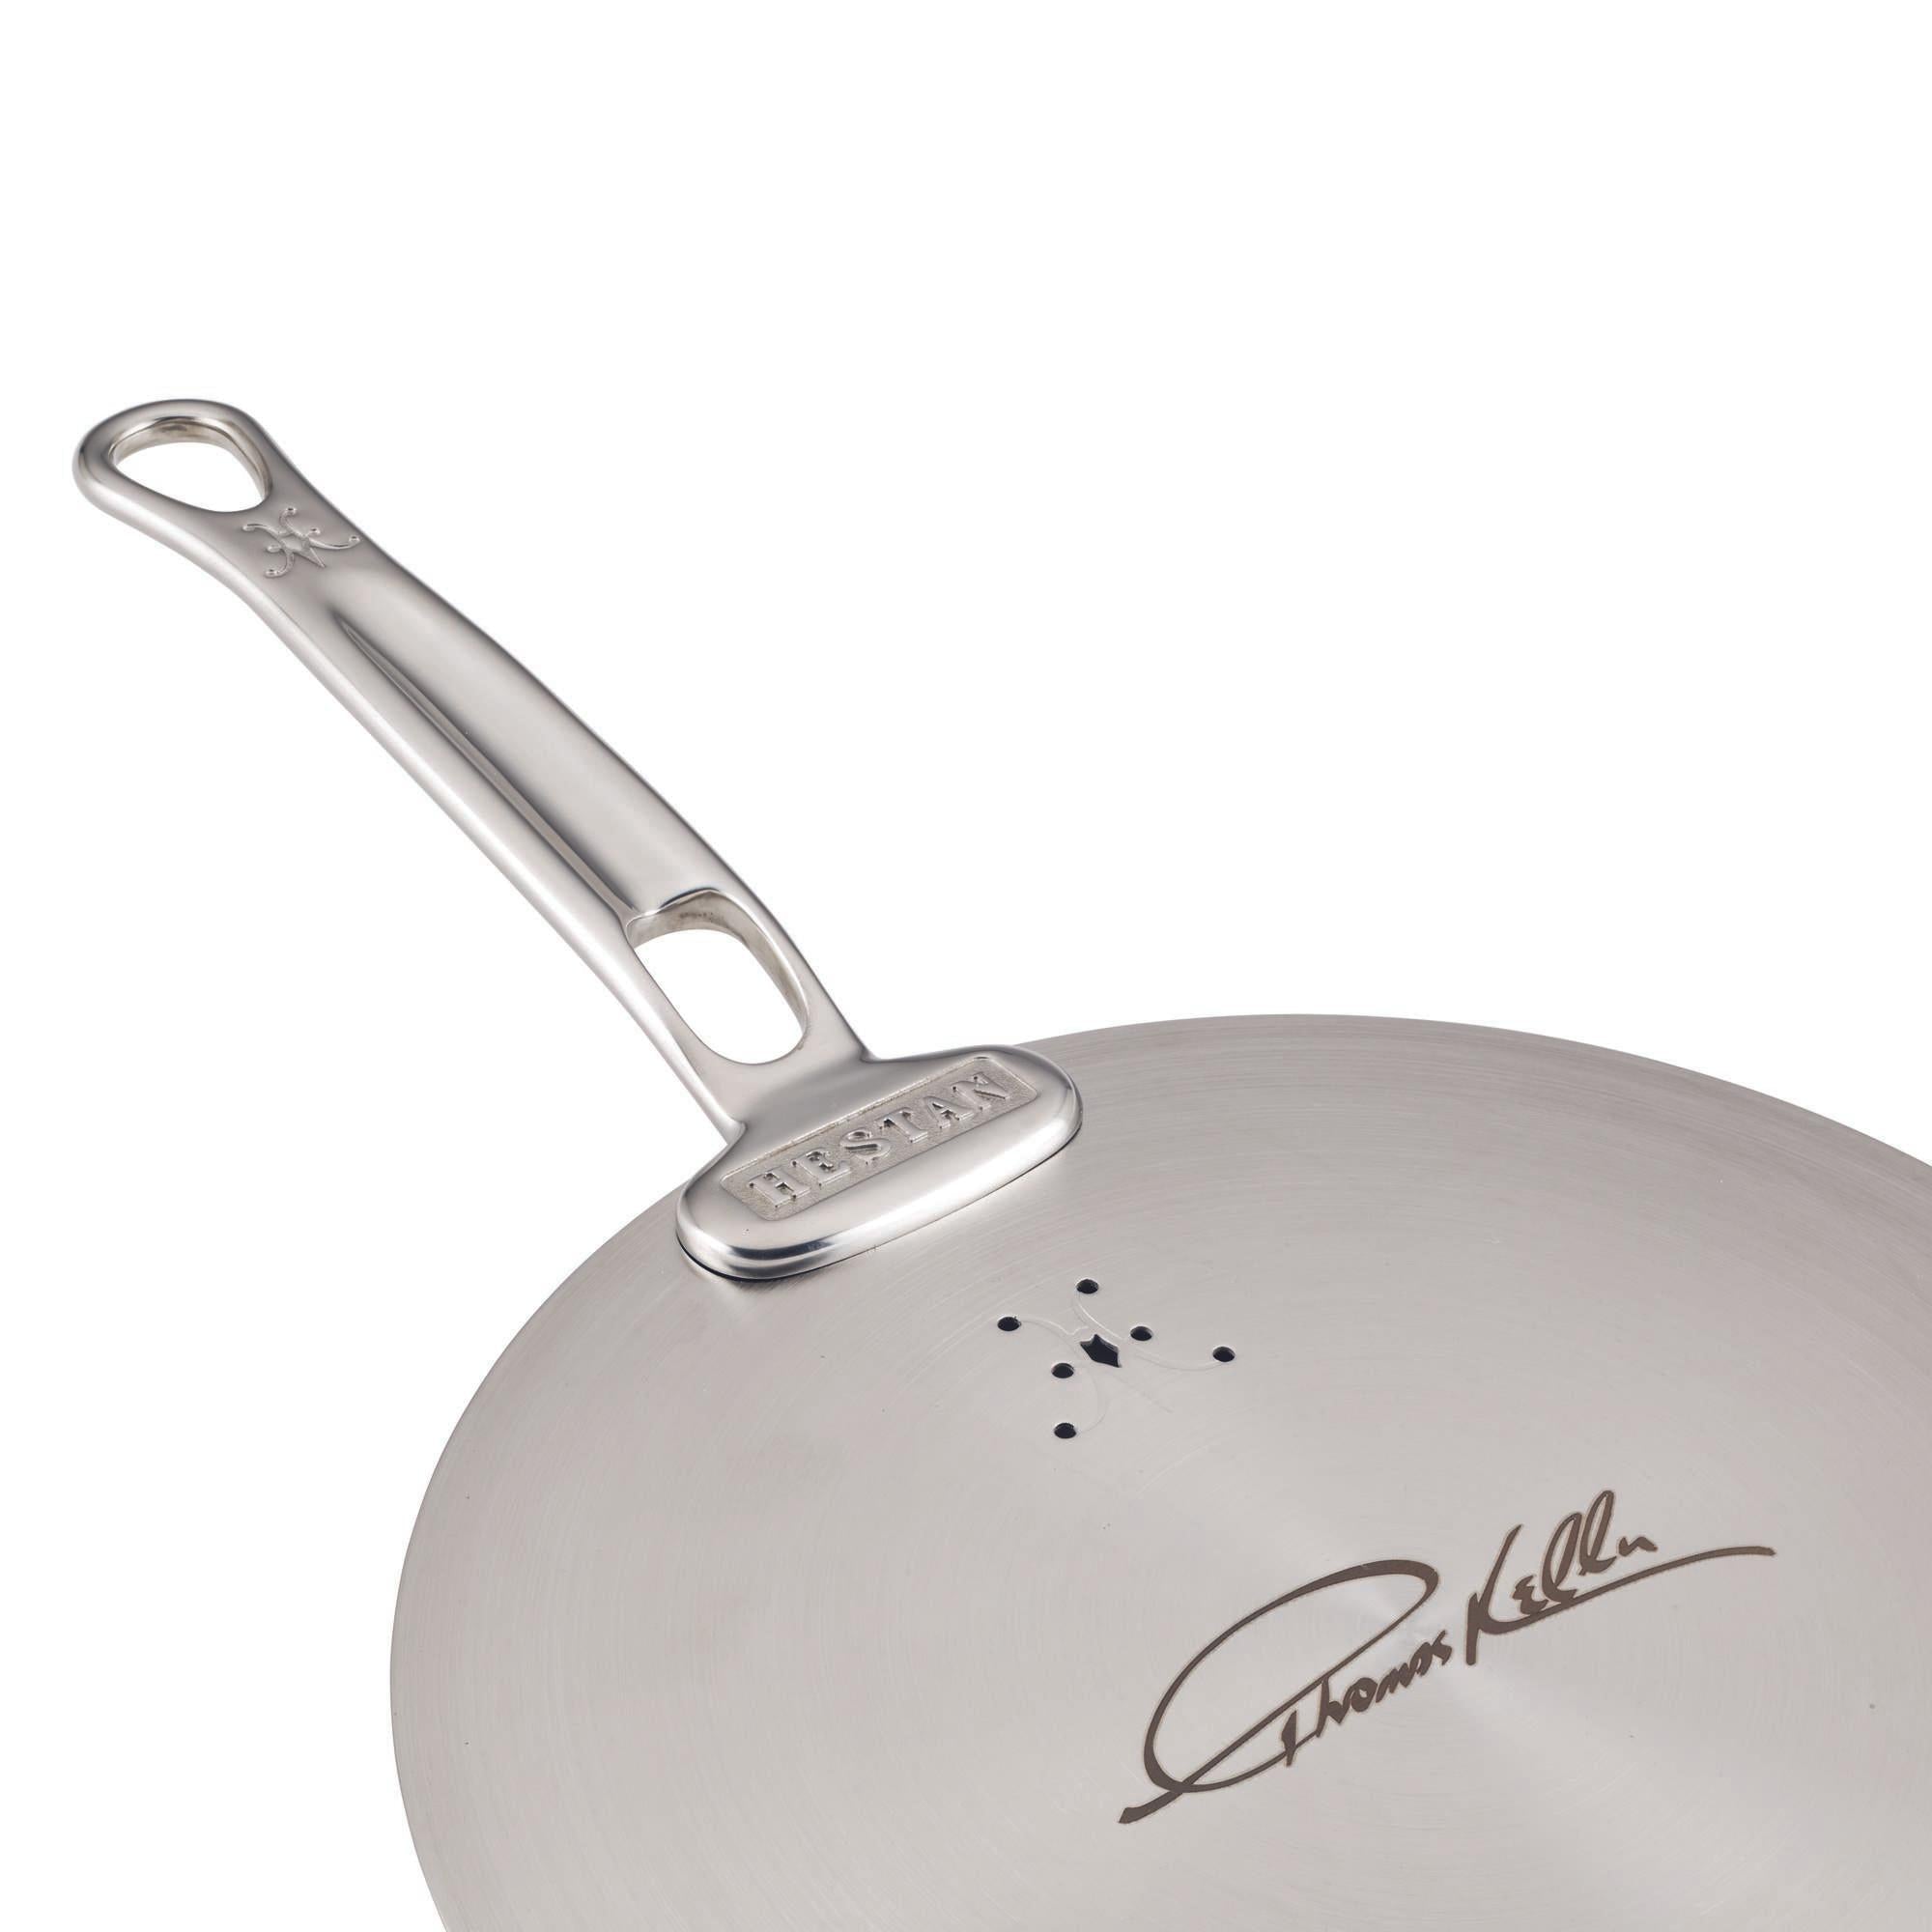 This Universal Lid Fits All of Your Pots and Pans